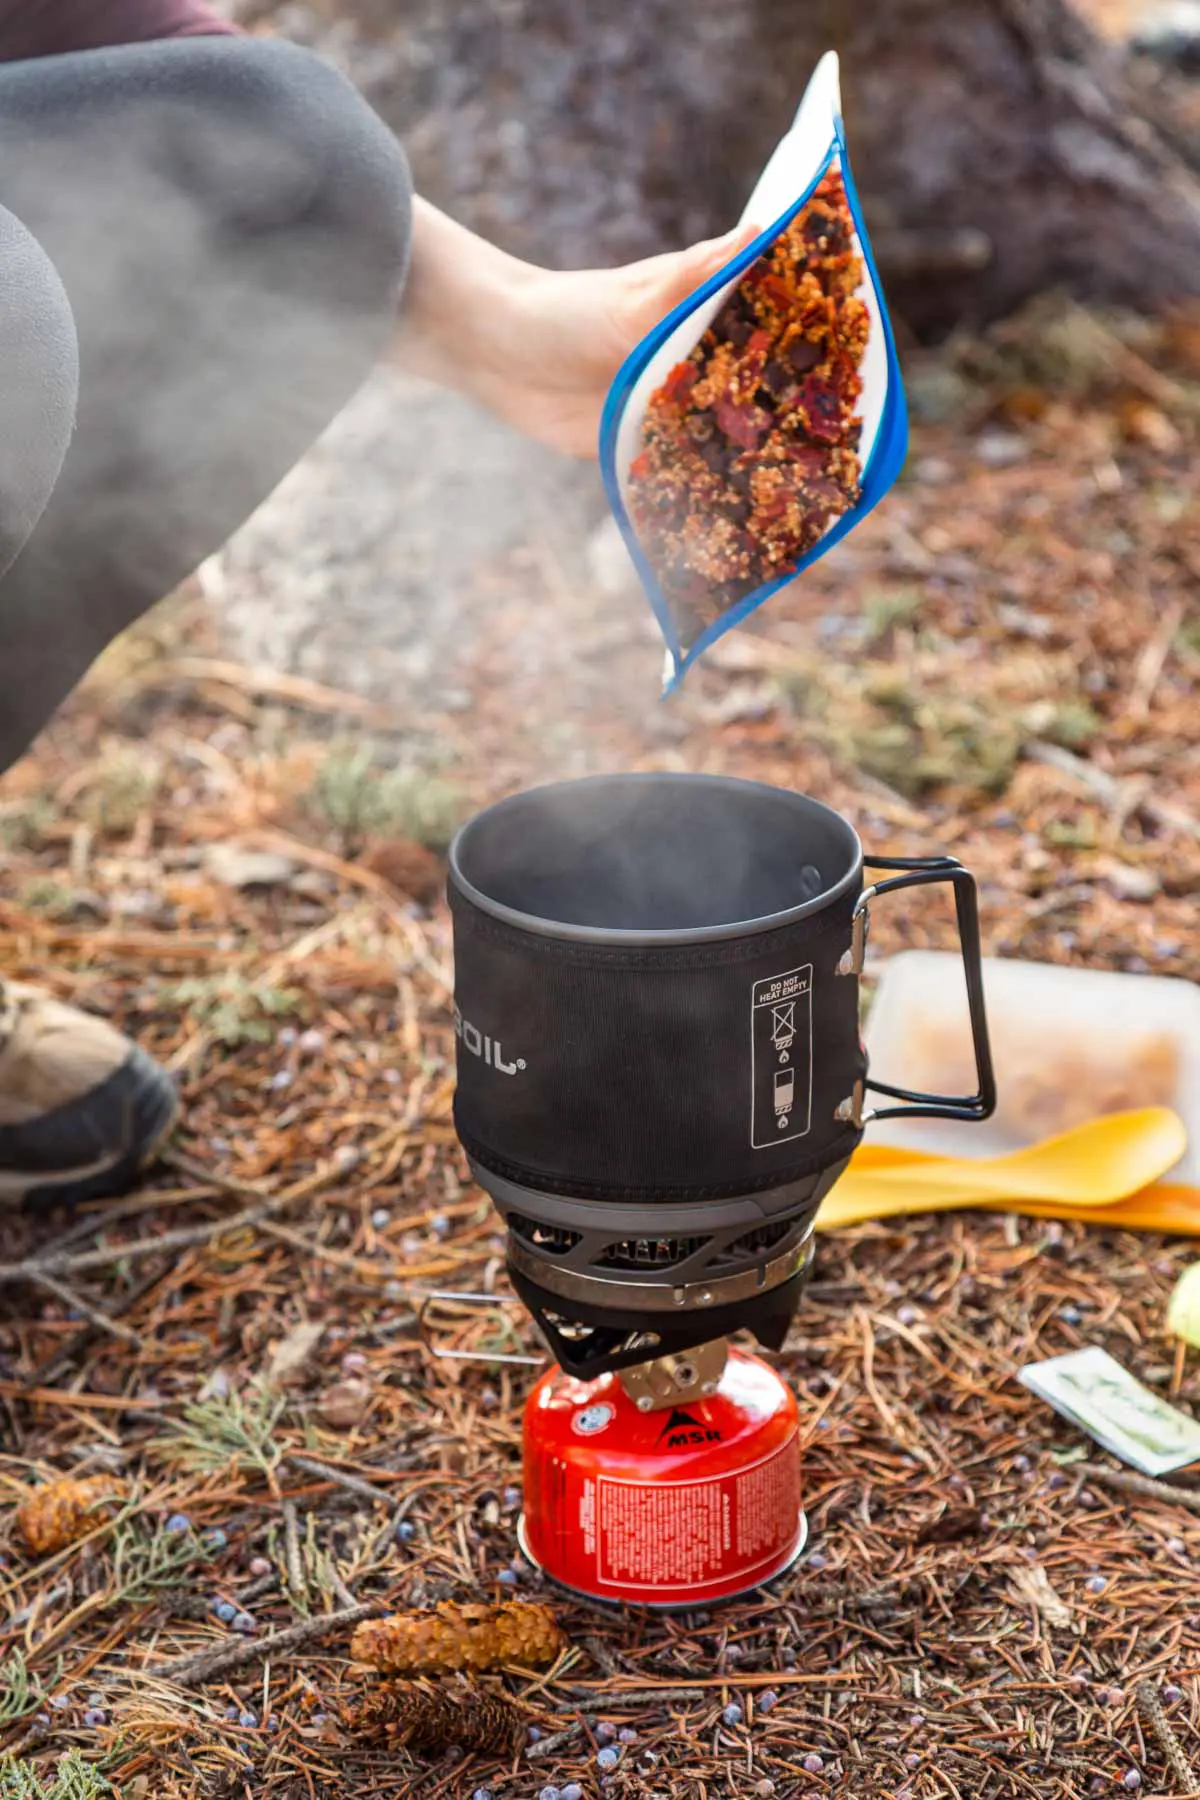 Megan pouring a backpacking meal from bag into a Jetboil stove